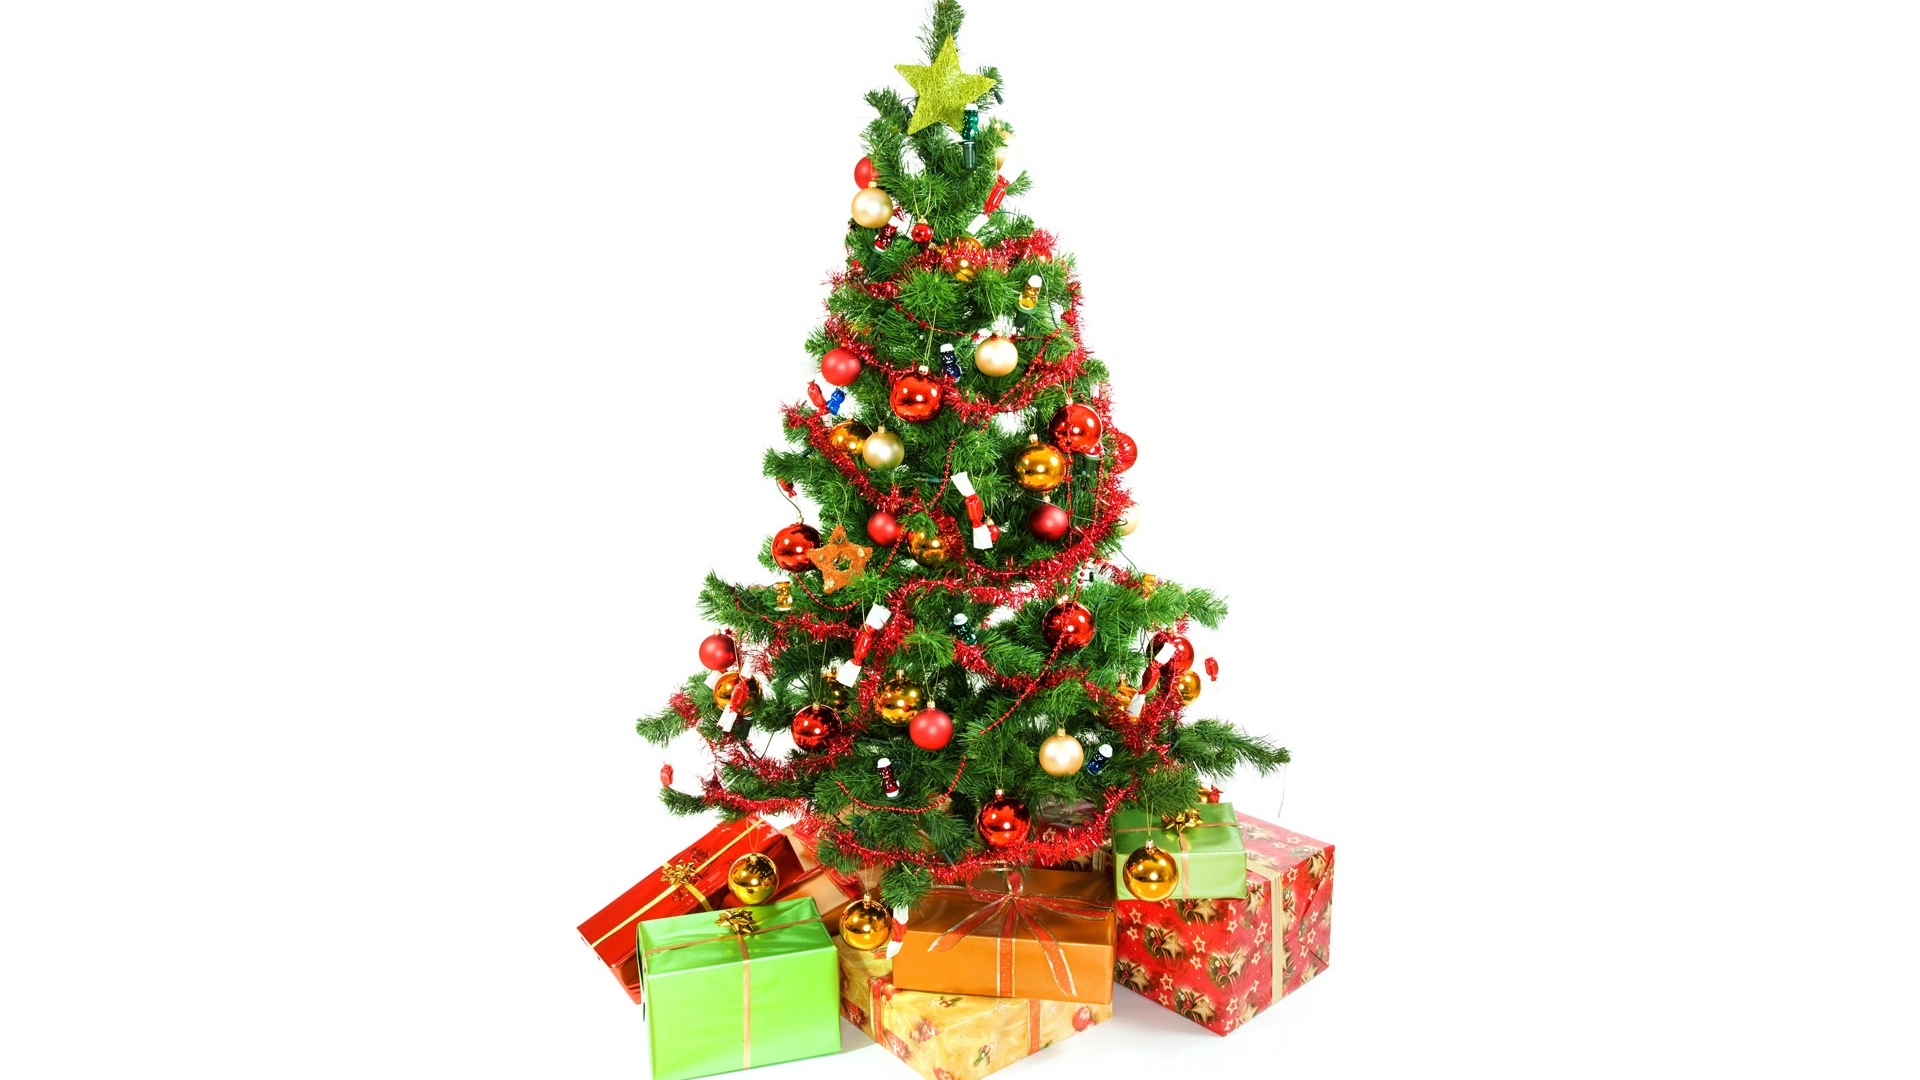 Christmas Tree HD Wallpapers New HD Wallpapers Download